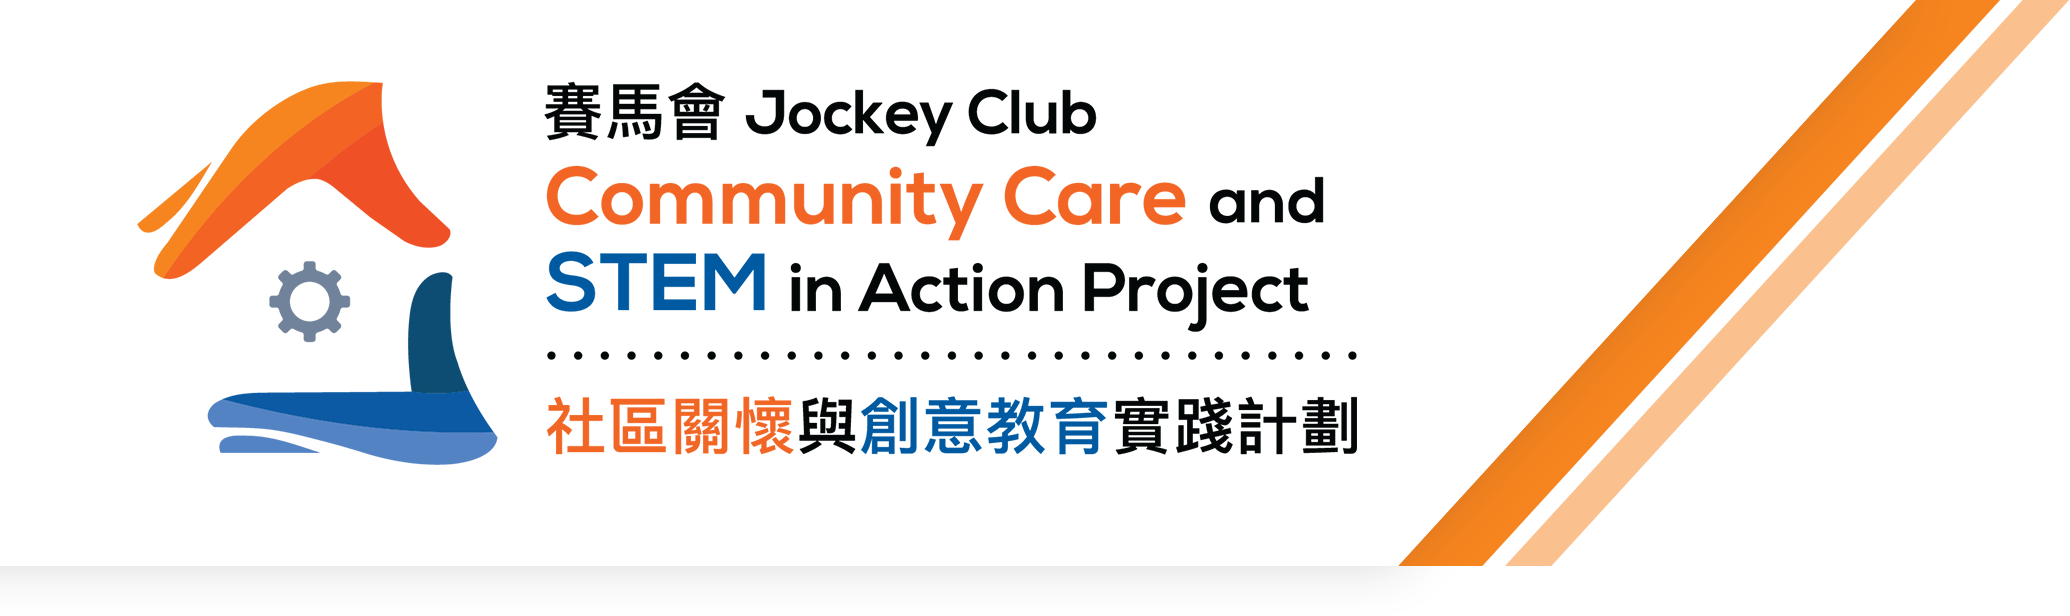 Community Care and STEM in Action Project